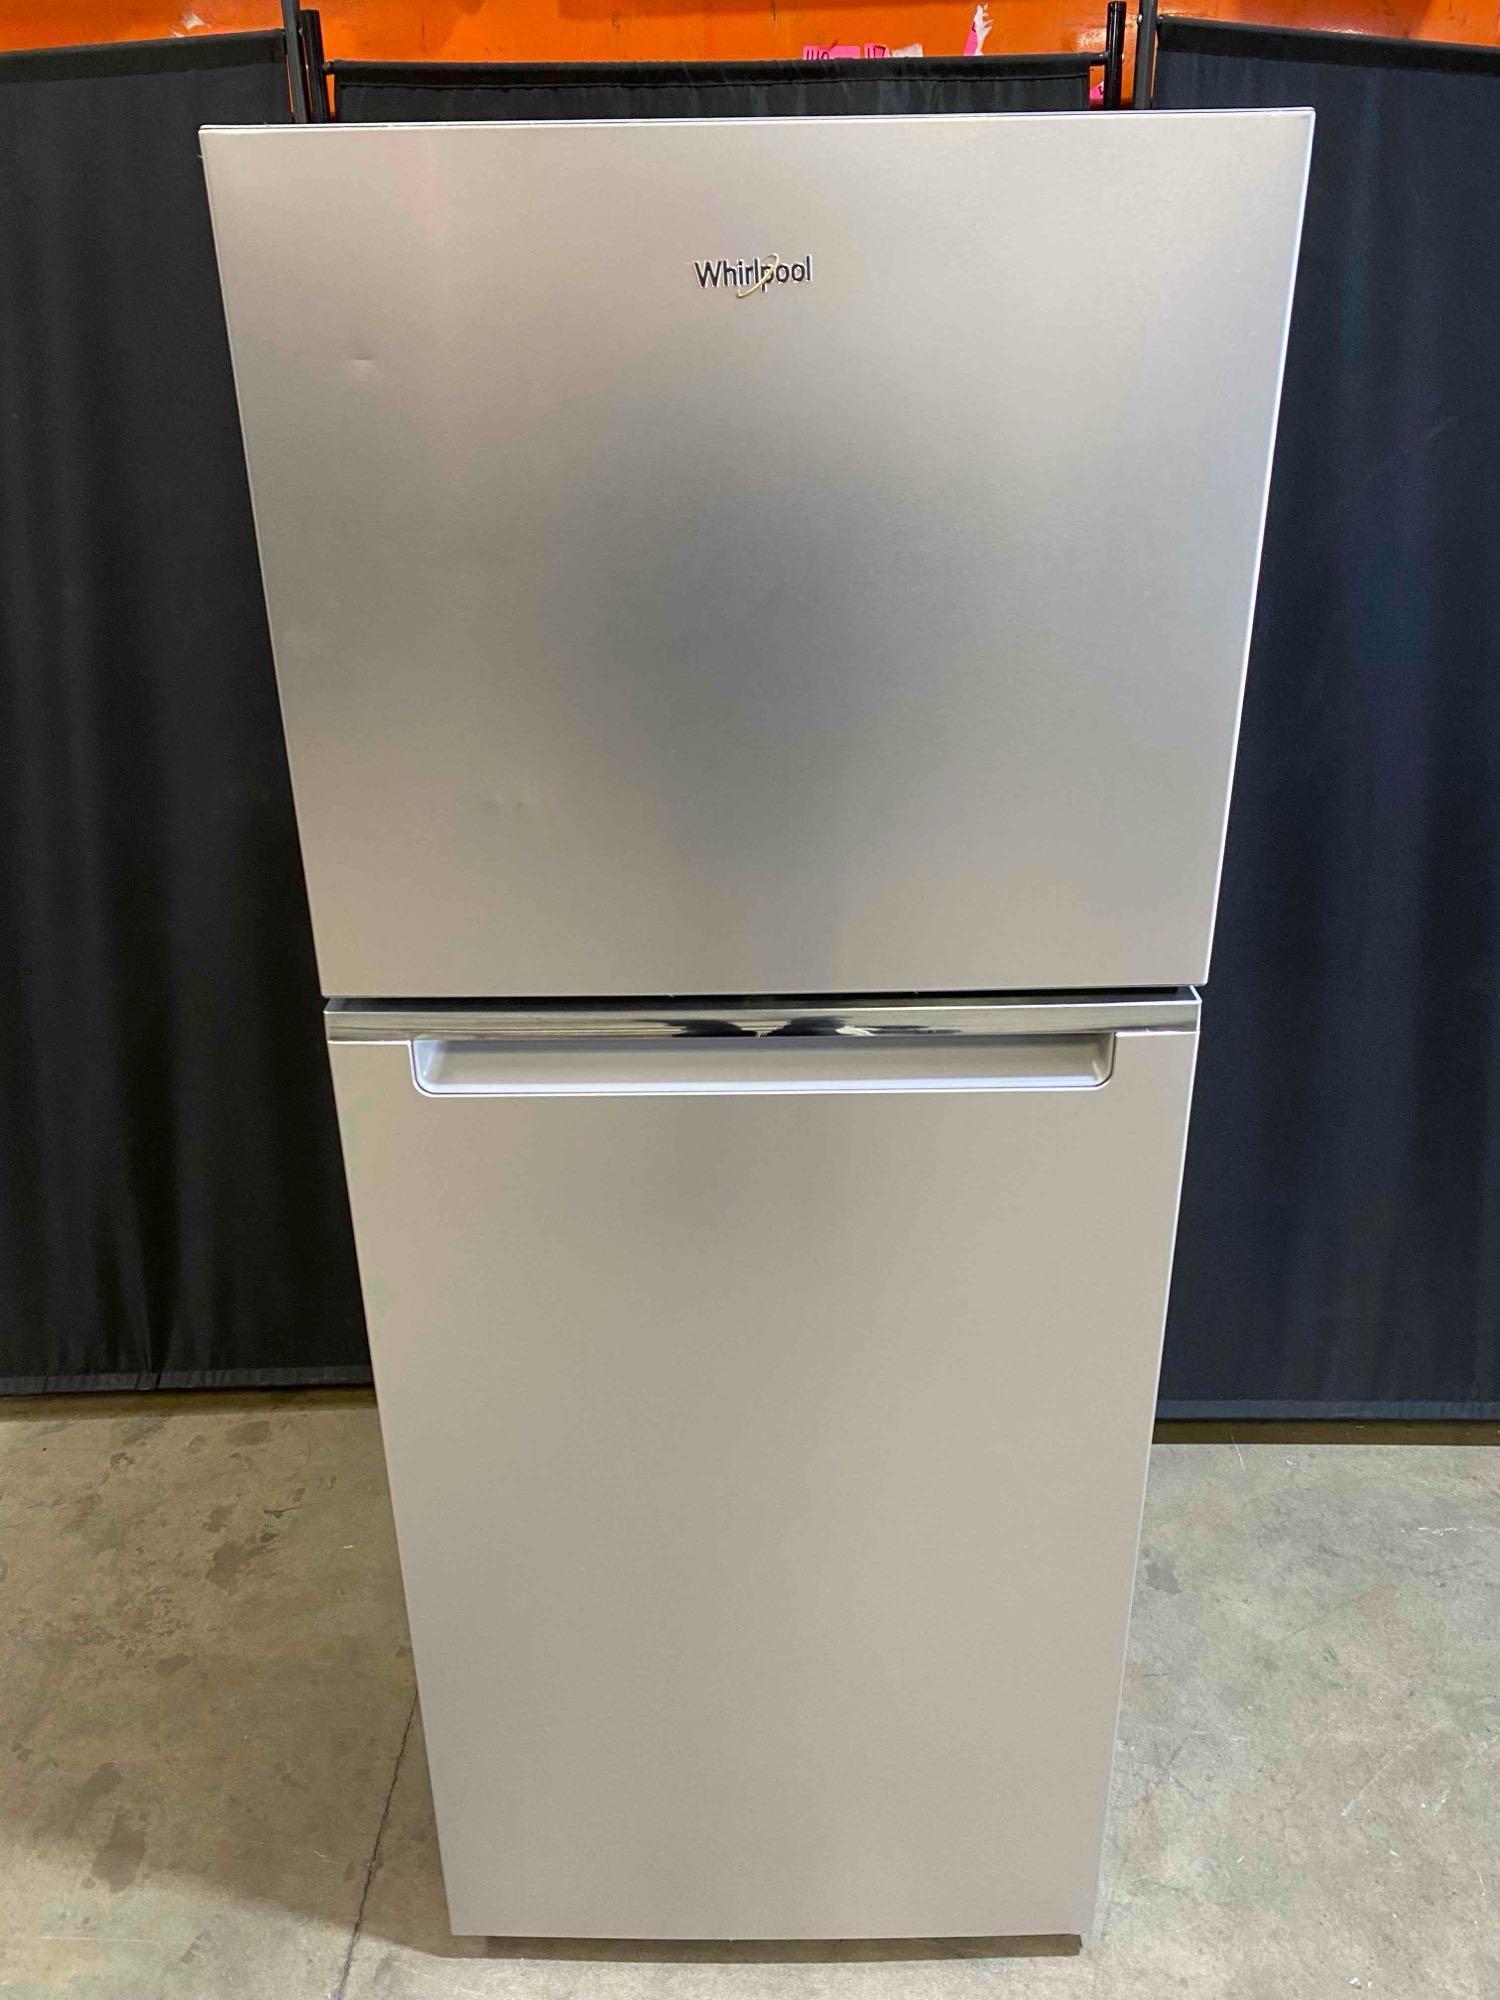 Whirlpool 24 in 11.6 cu ft. Top Freezer Refrigerator in Fingerprint Resistant Stainless Finish